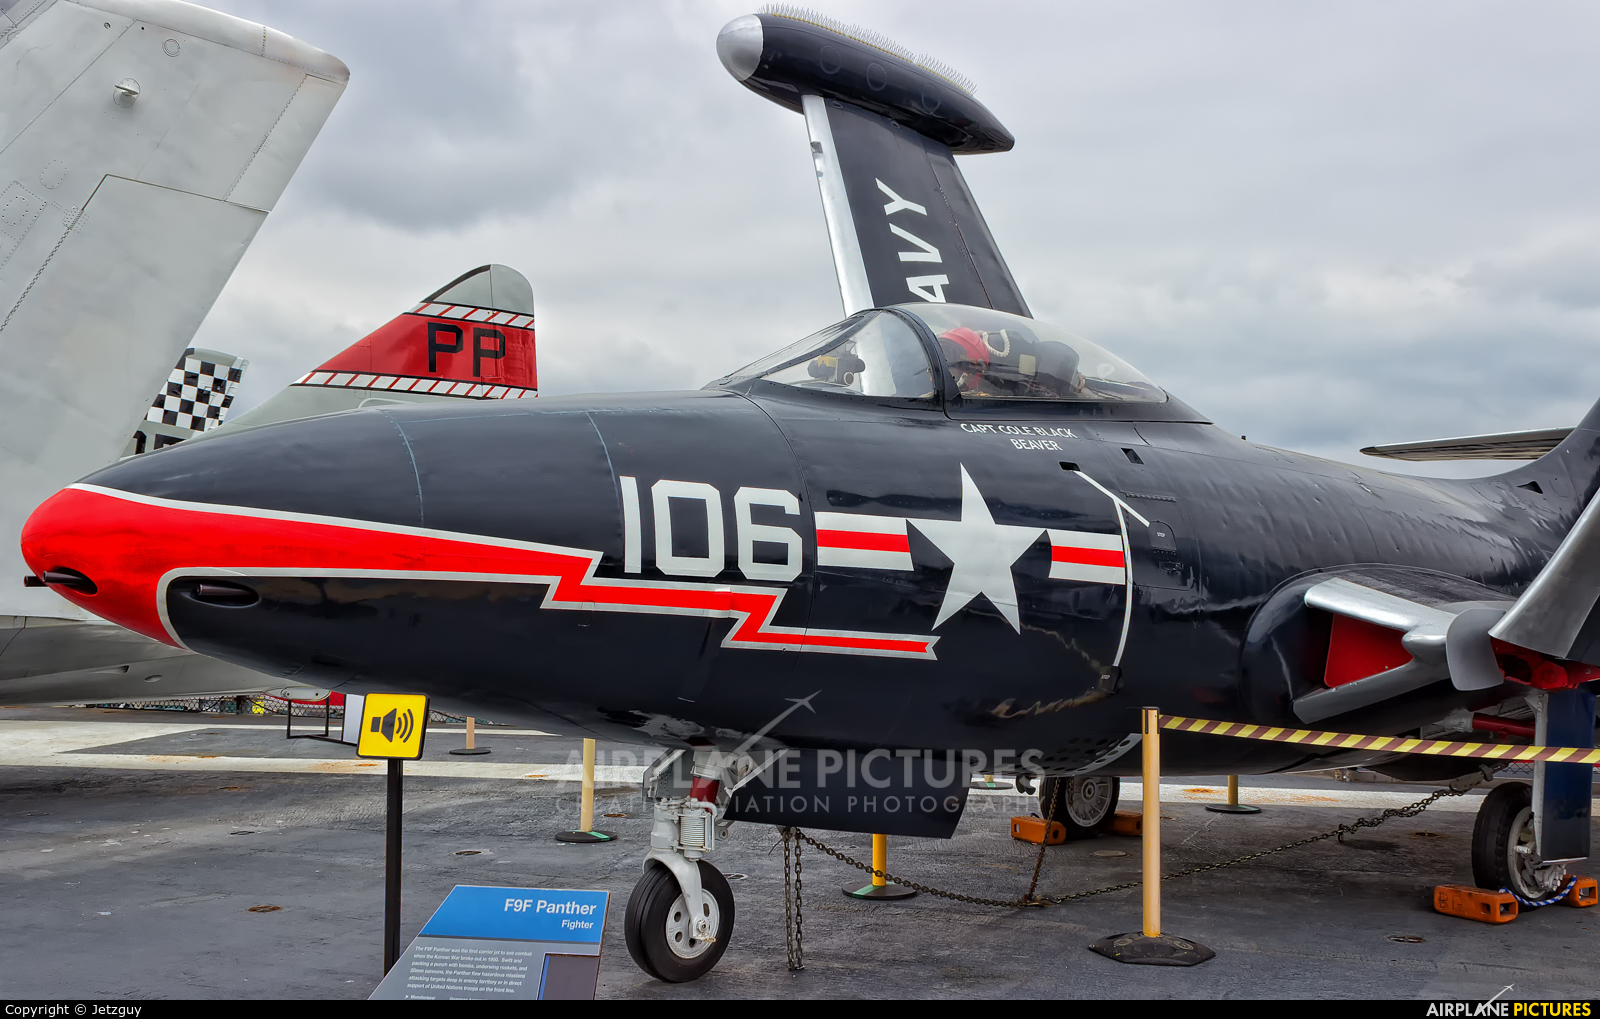 USA - Navy 141136 aircraft at San Diego - USS Midway Museum